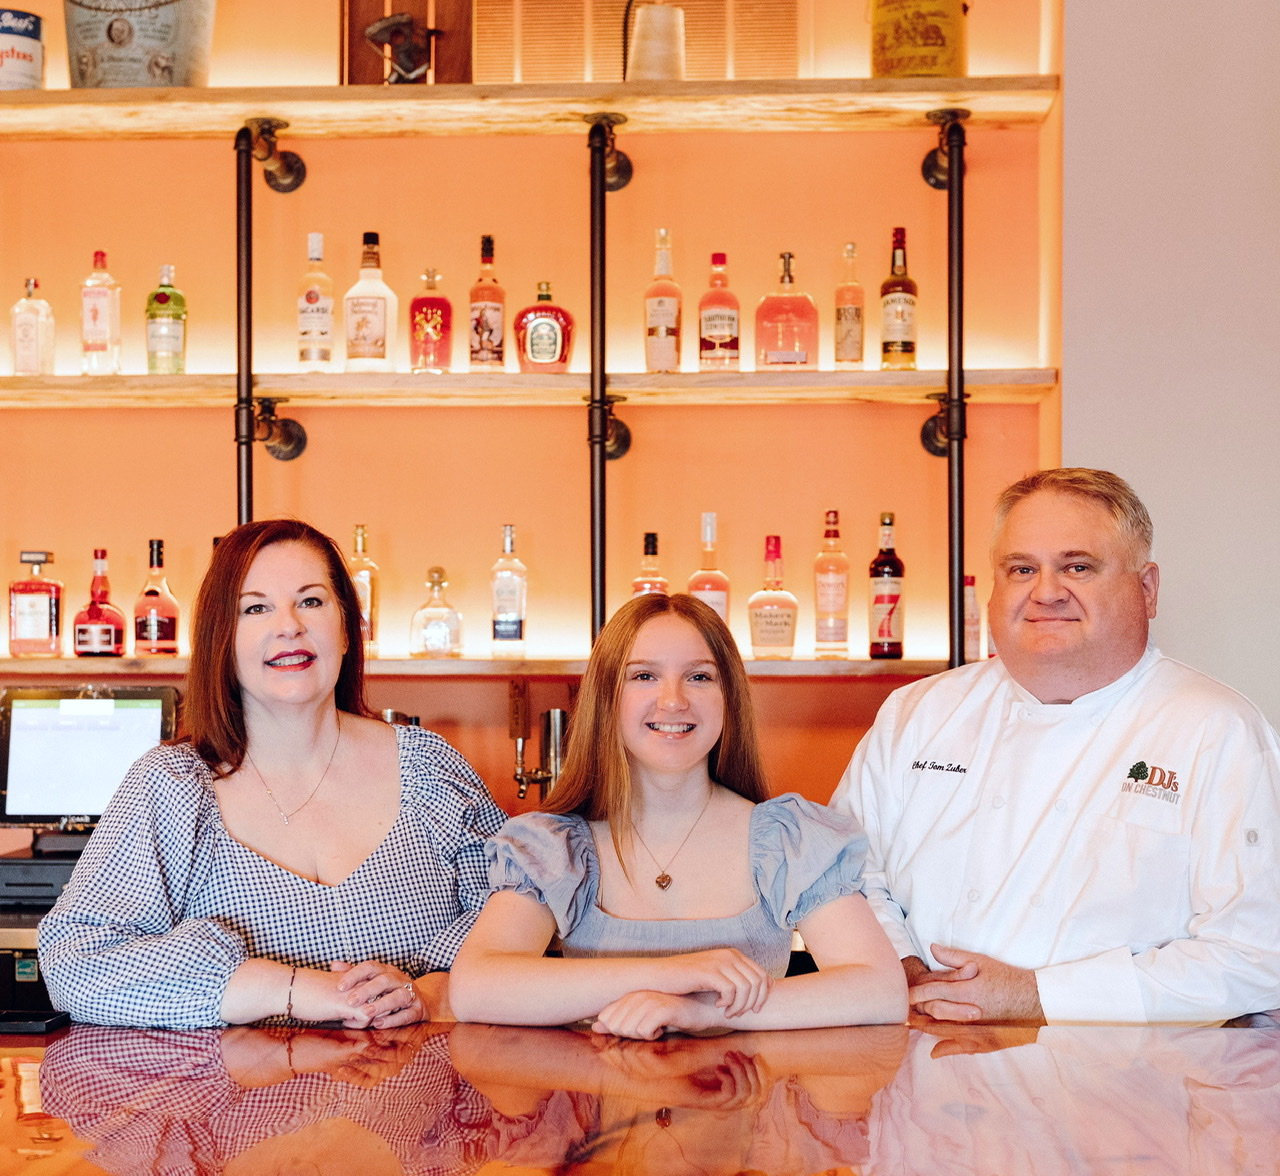 Zuber family behind the bar